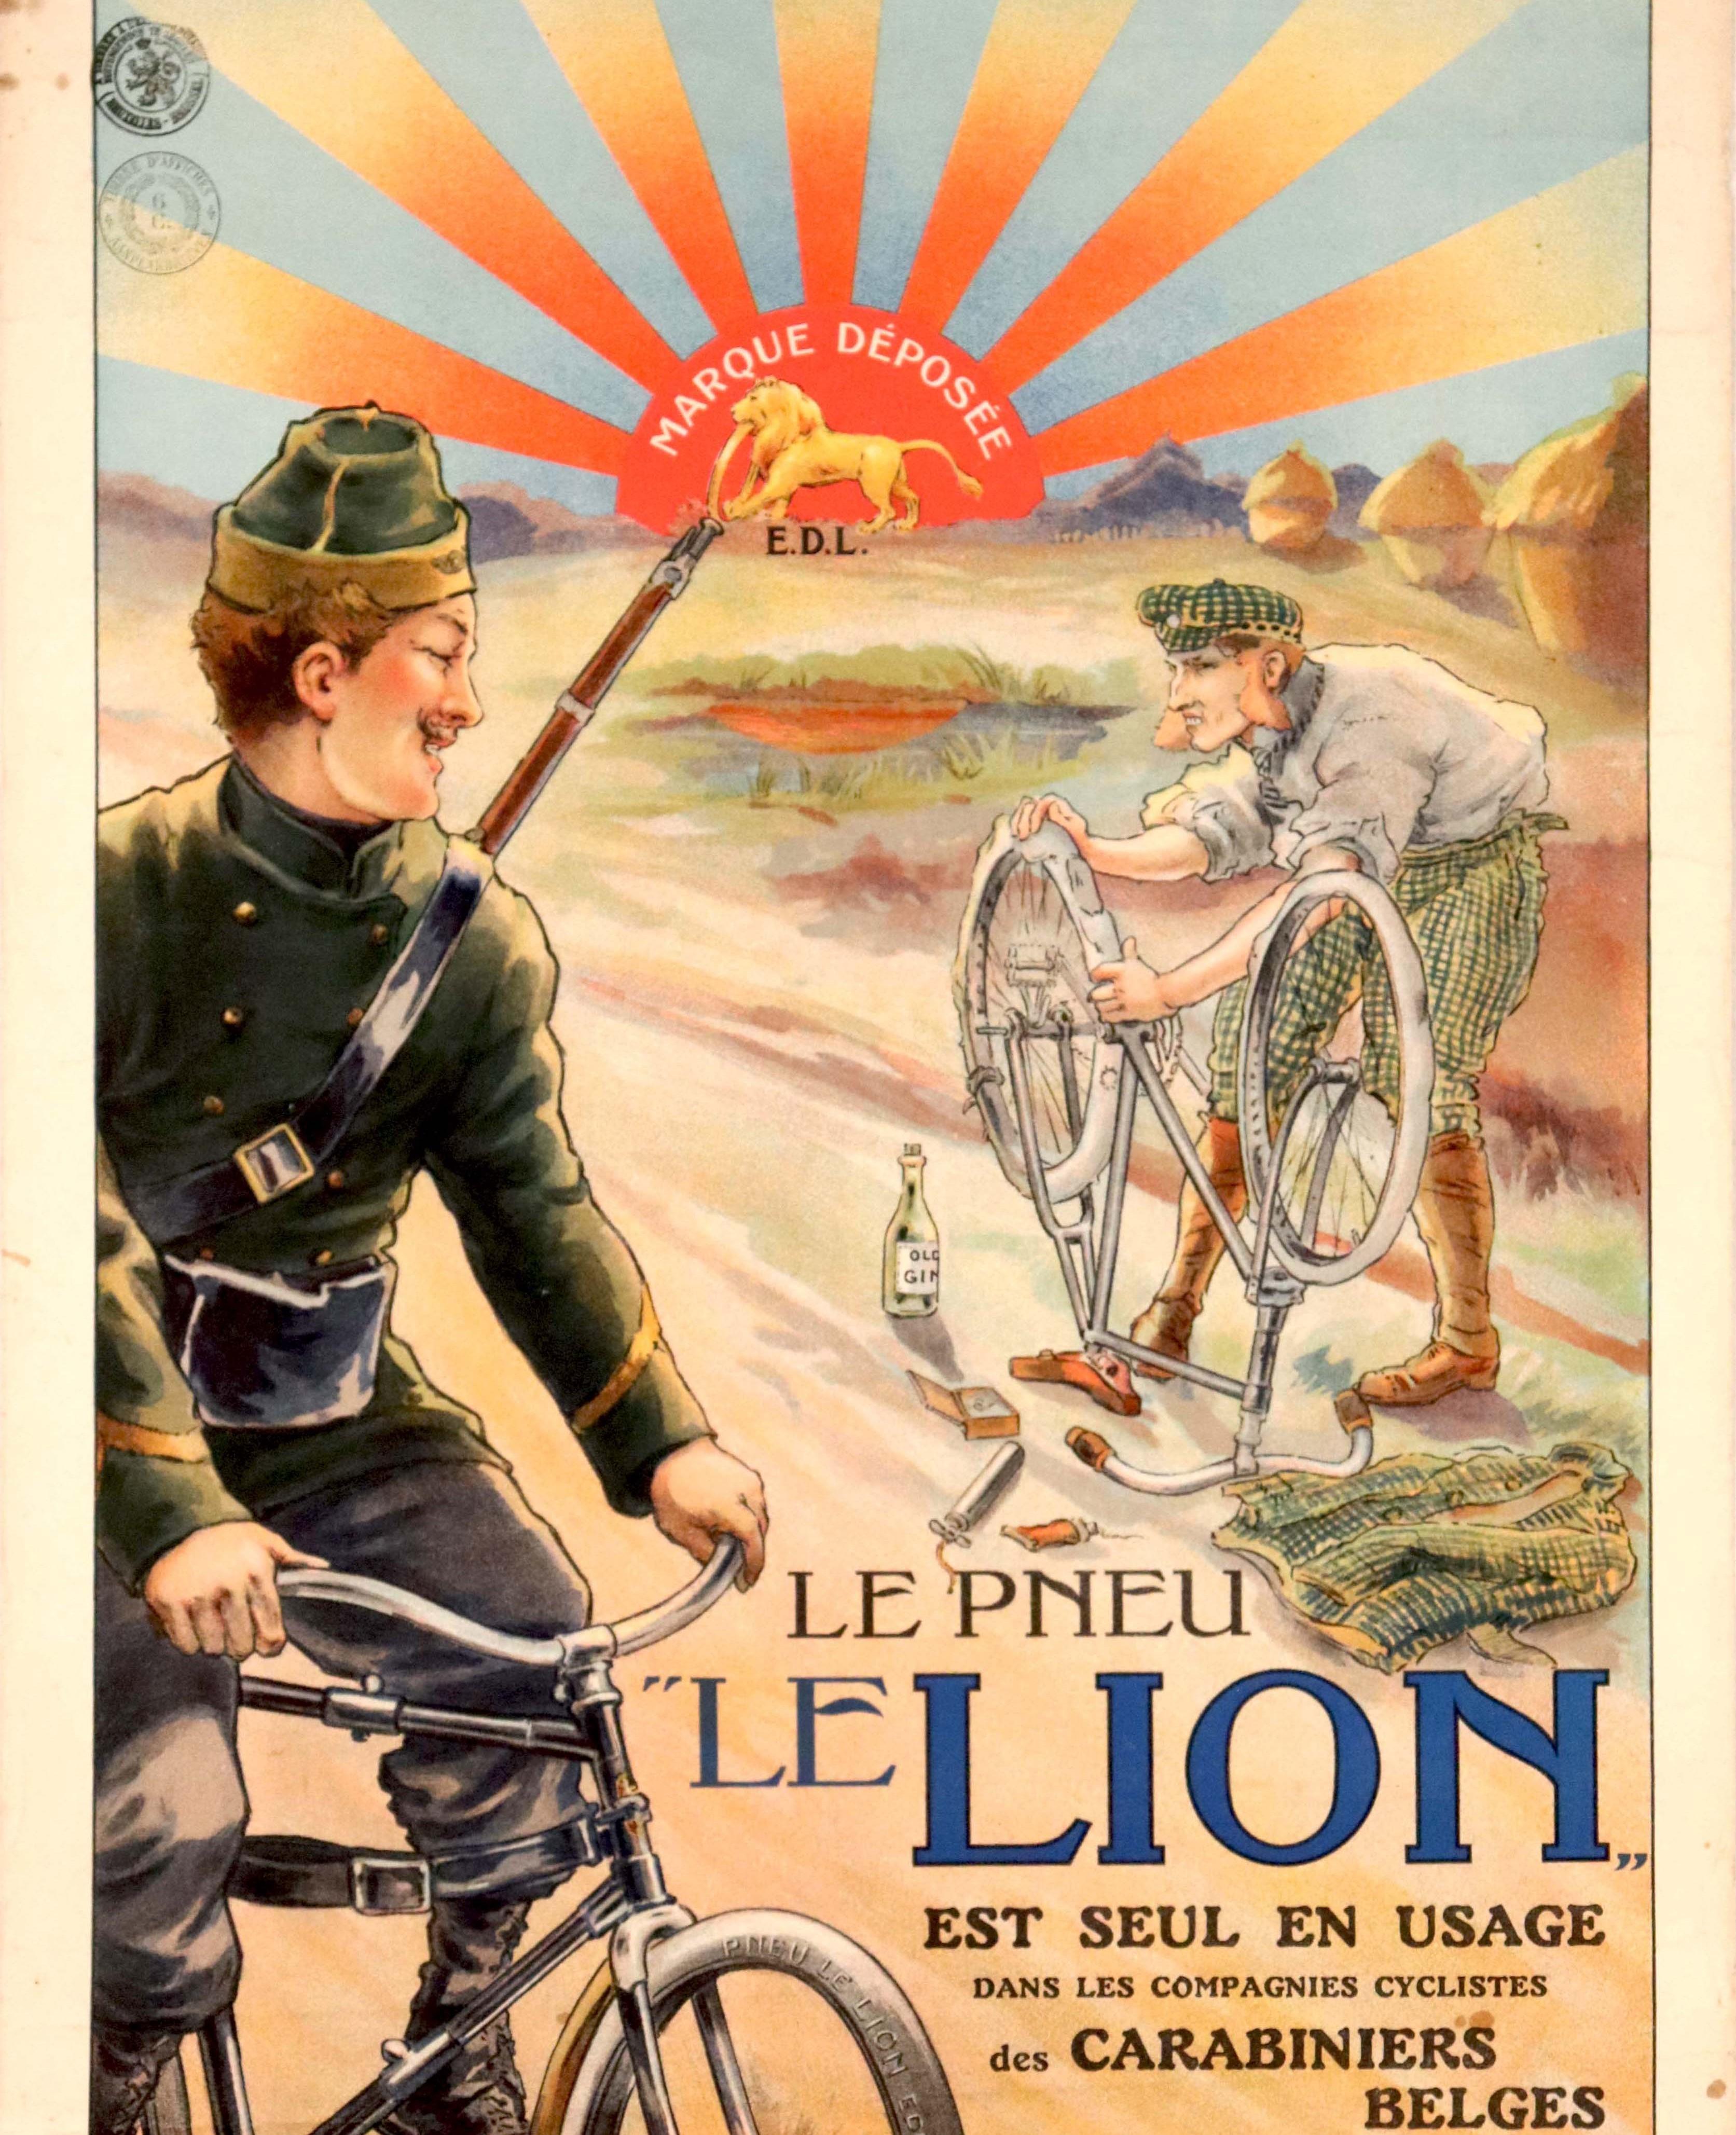 Original antique advertising poster for Le Lion tyres featuring an illustration of a smiling Belgian carabinier soldier with a rifle gun over his shoulder riding a bicycle past a man mending a flat tyre on his bike on the side of a countryside path,